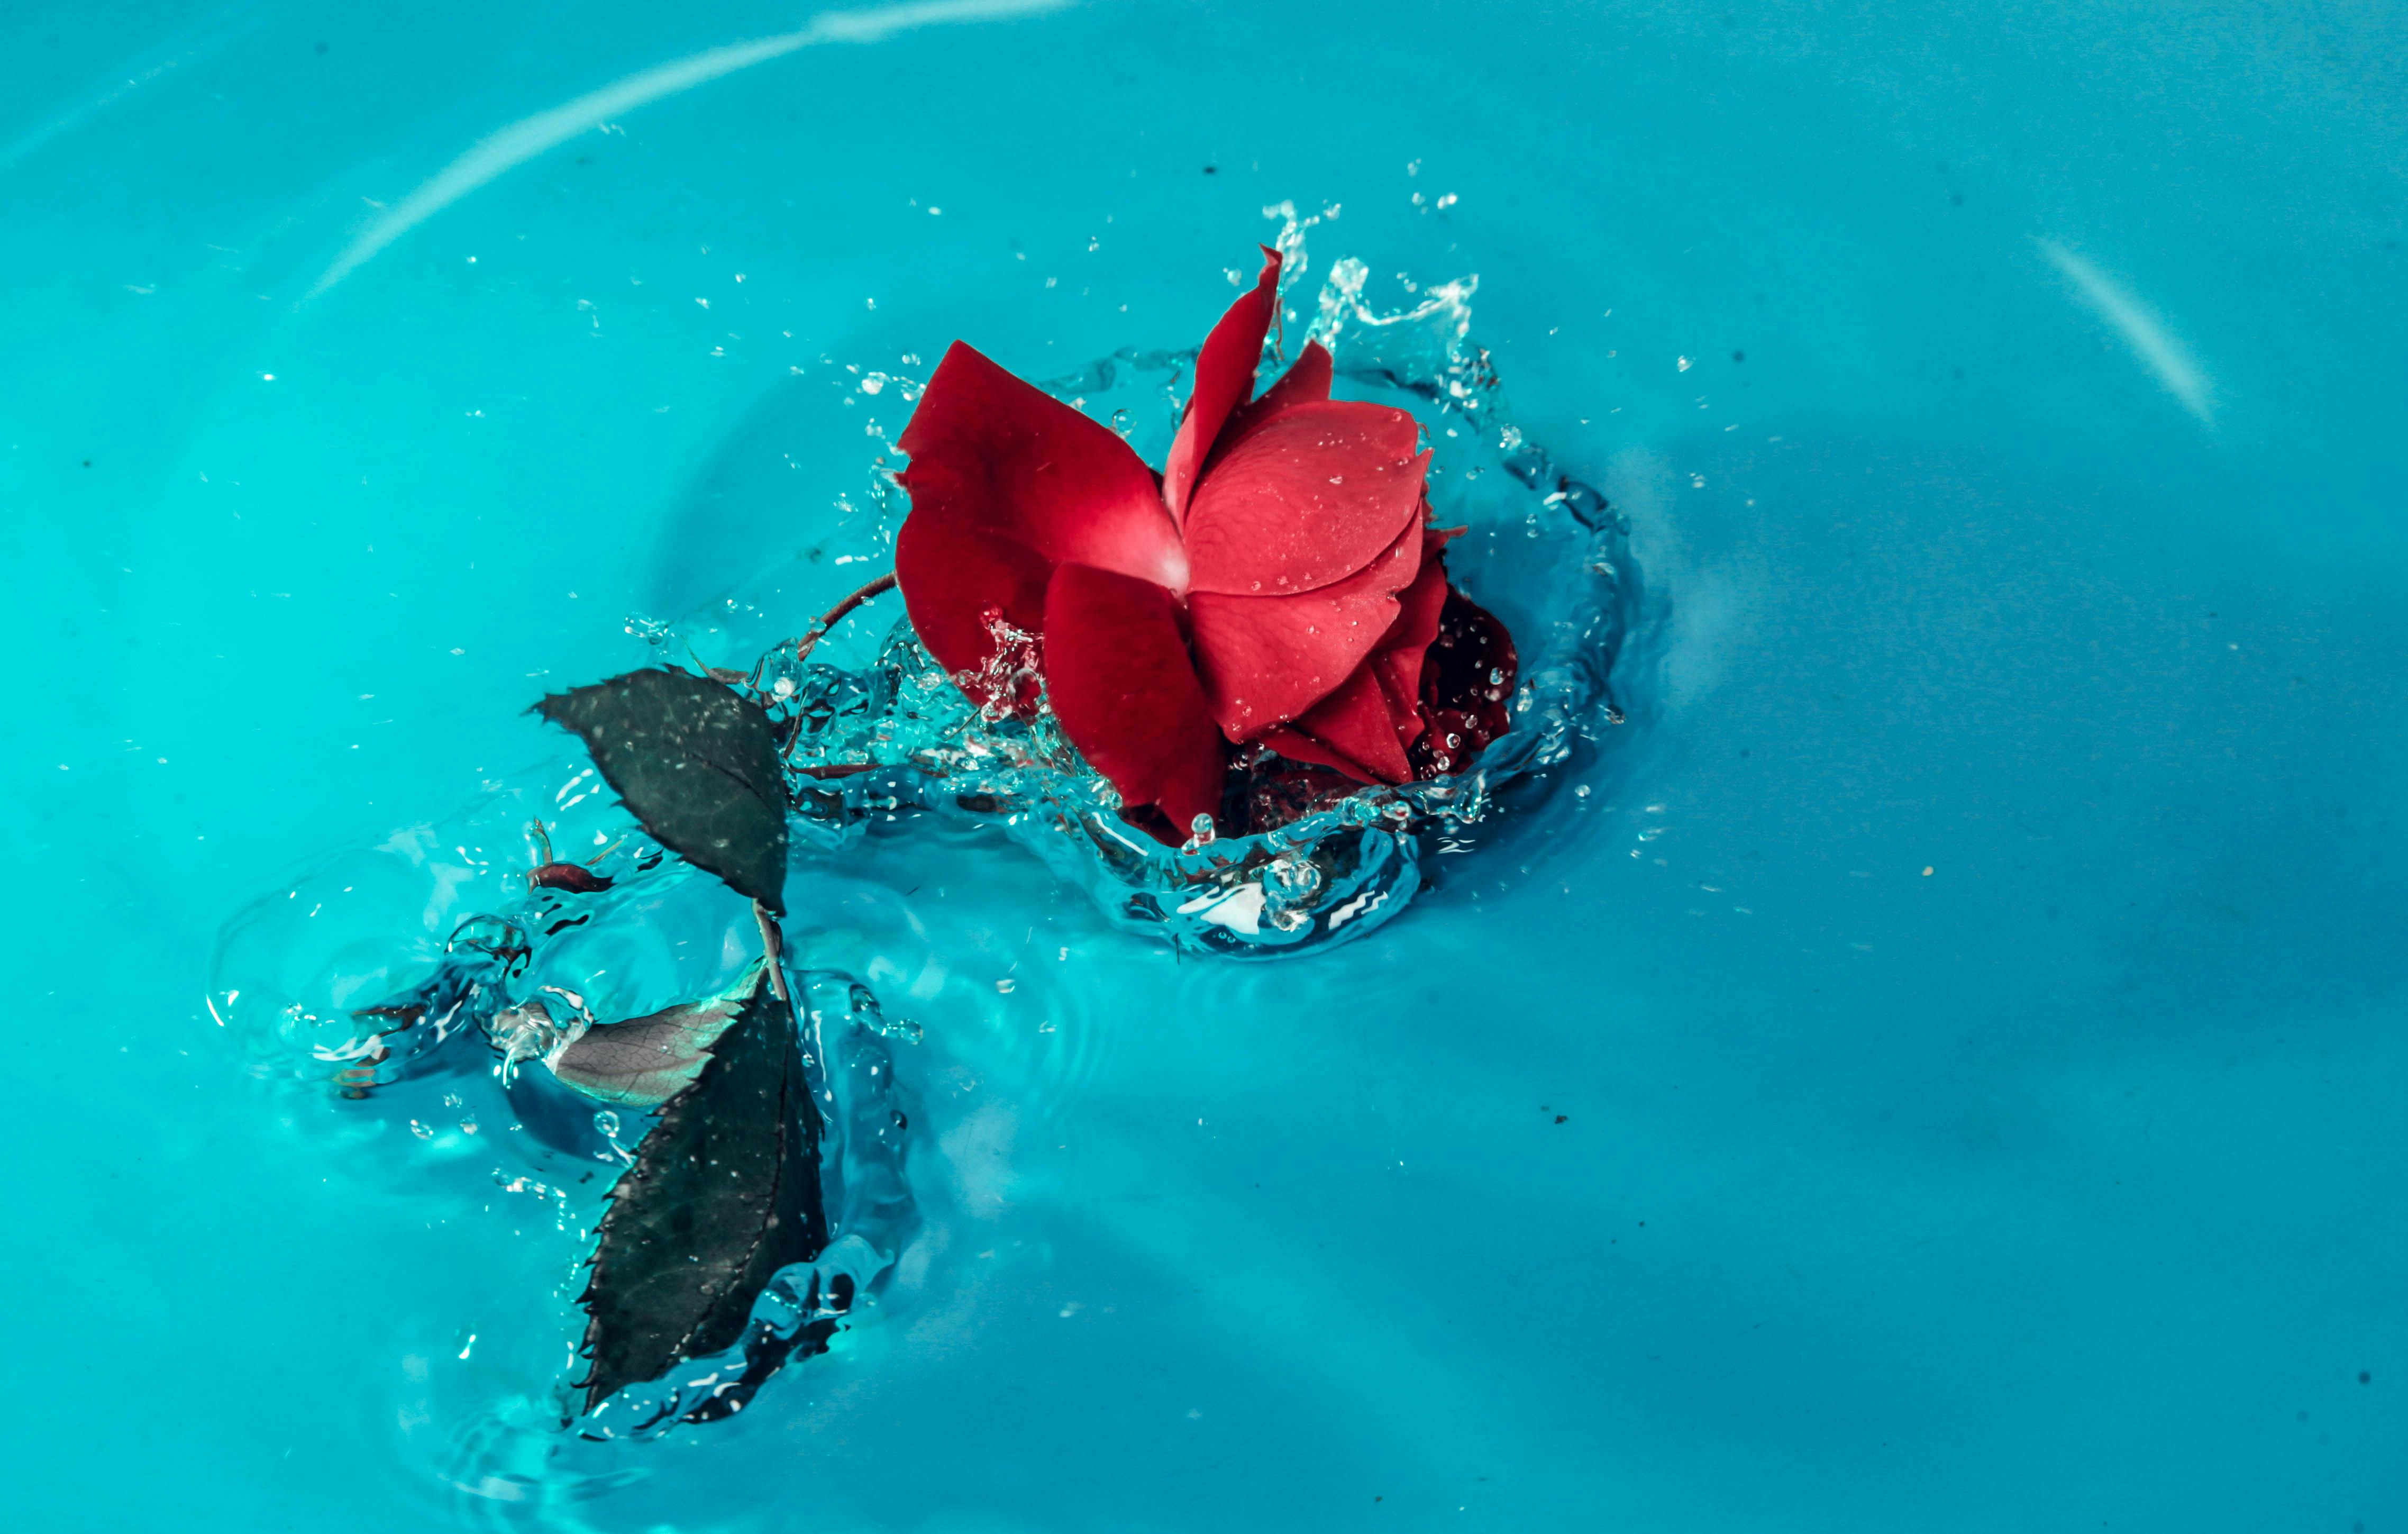 Rose With Water Drops Images  Free Download on Freepik